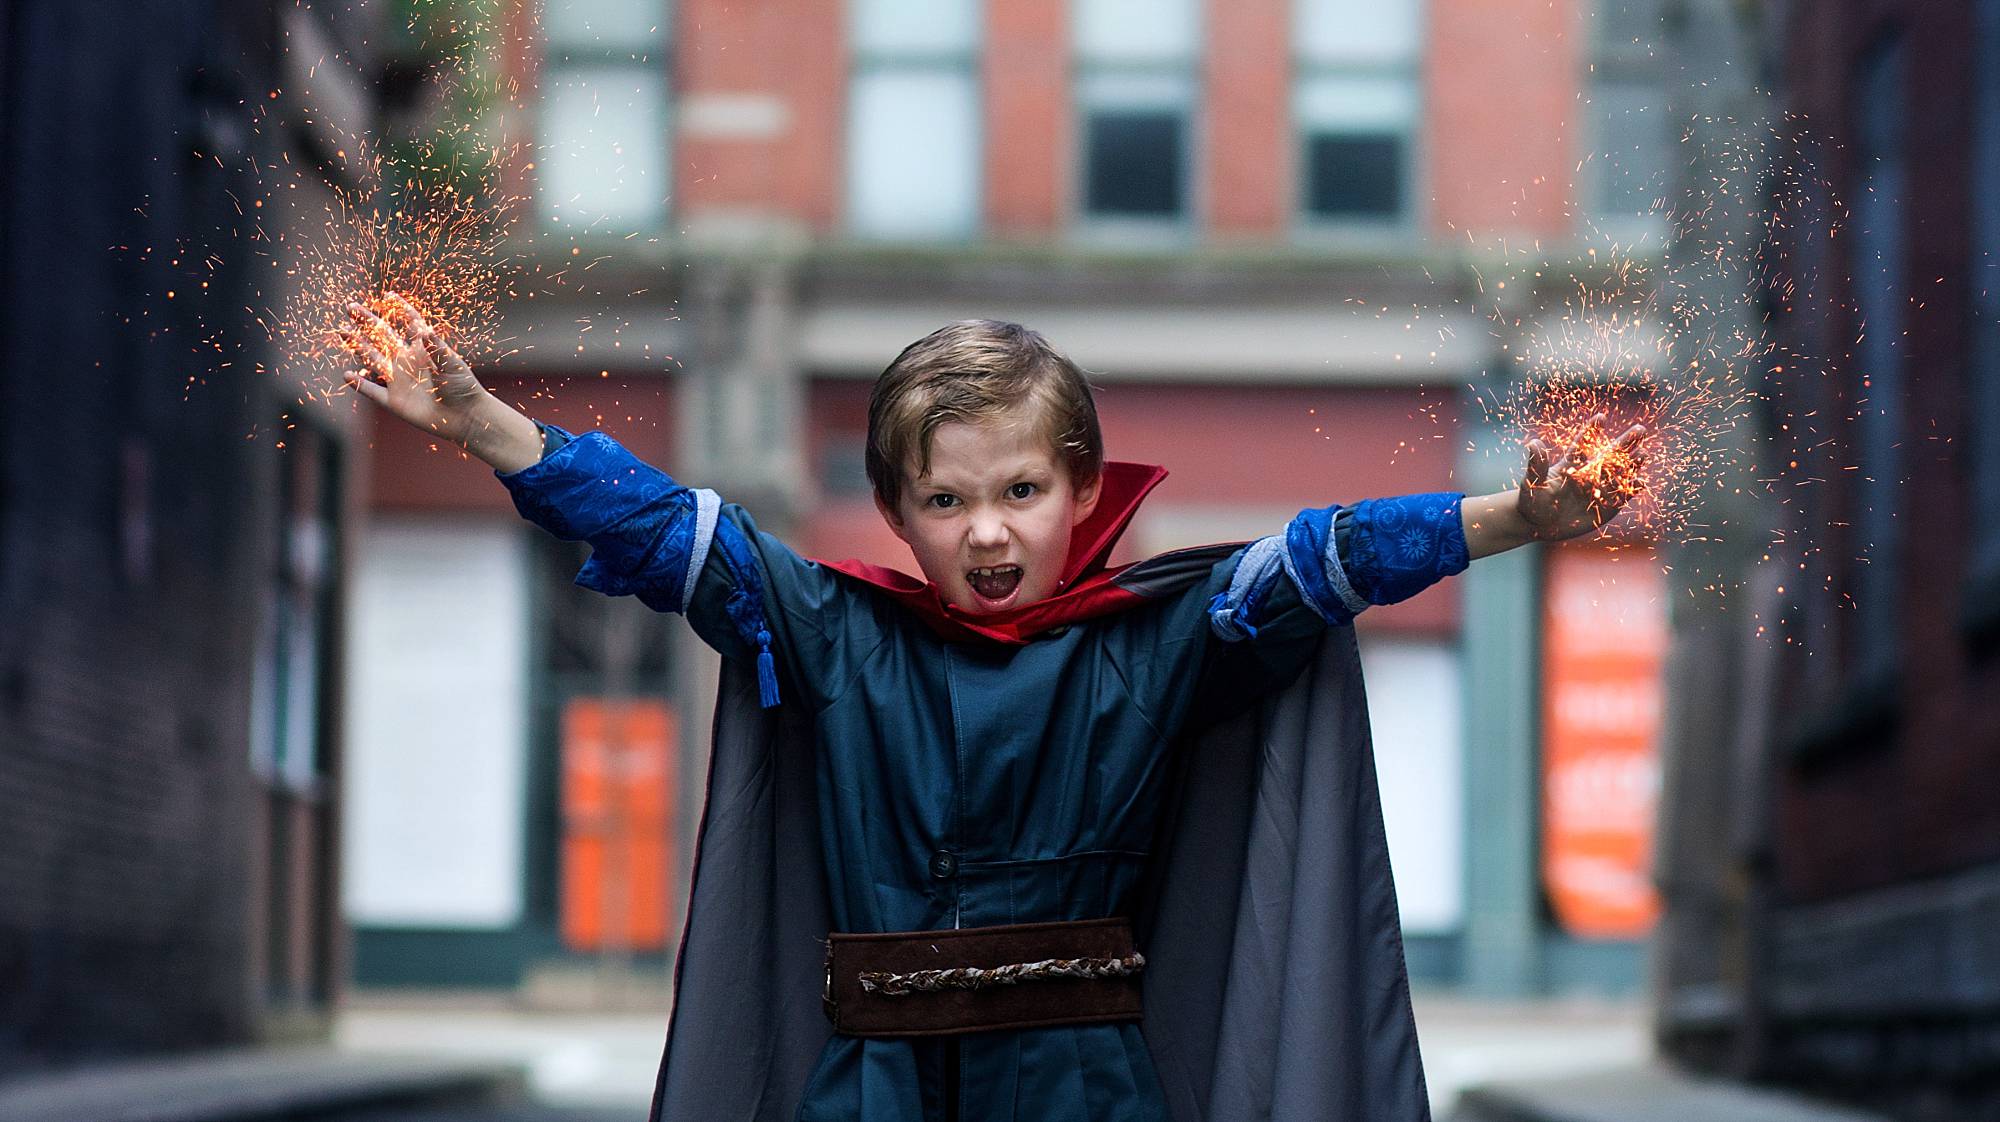 image of a little boy dressed as a comic book hero shooting orange sparks out of his hands